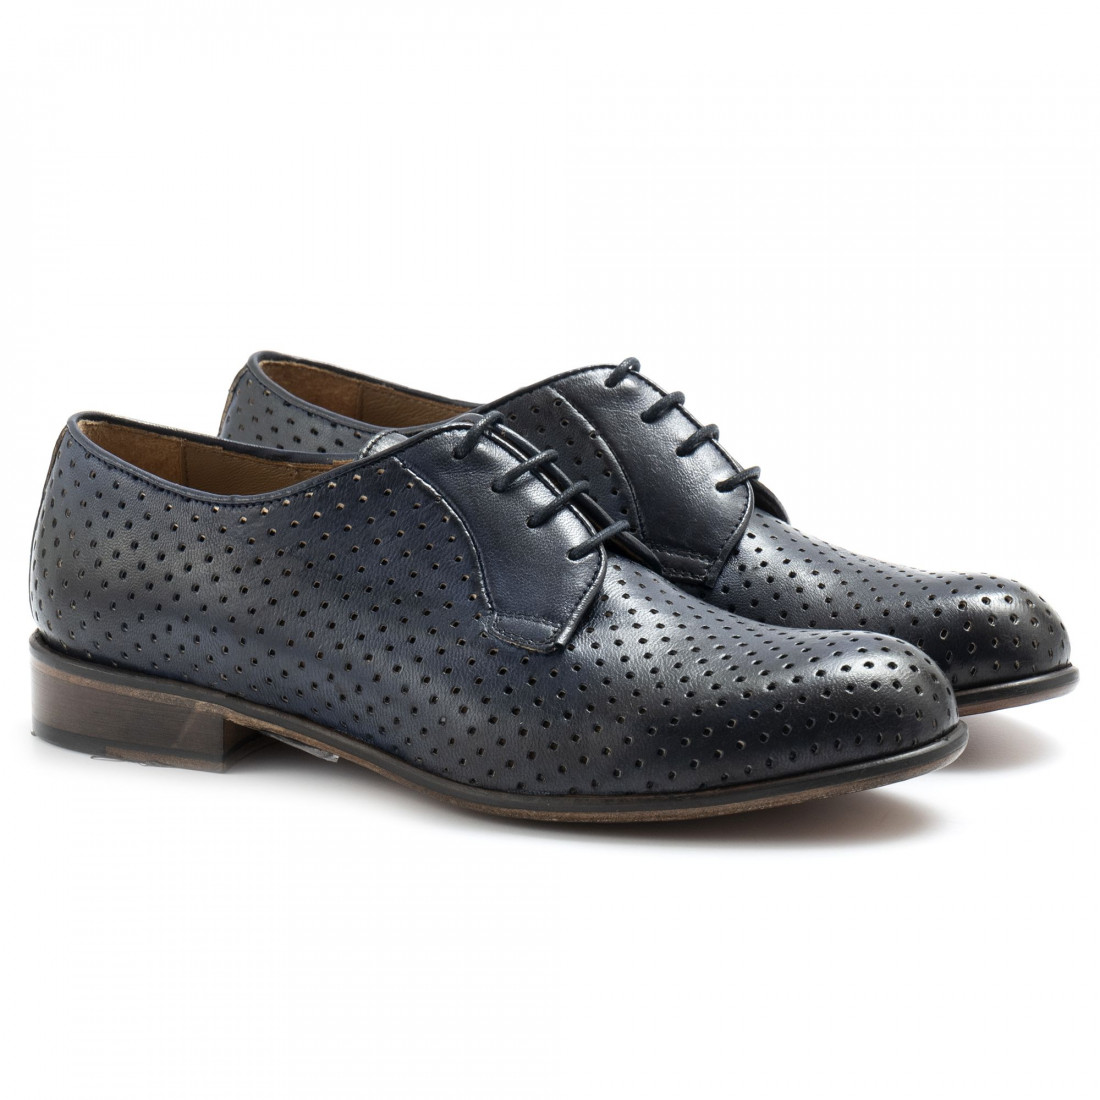 Women's Sangiorgio lace up shoes in blue leather